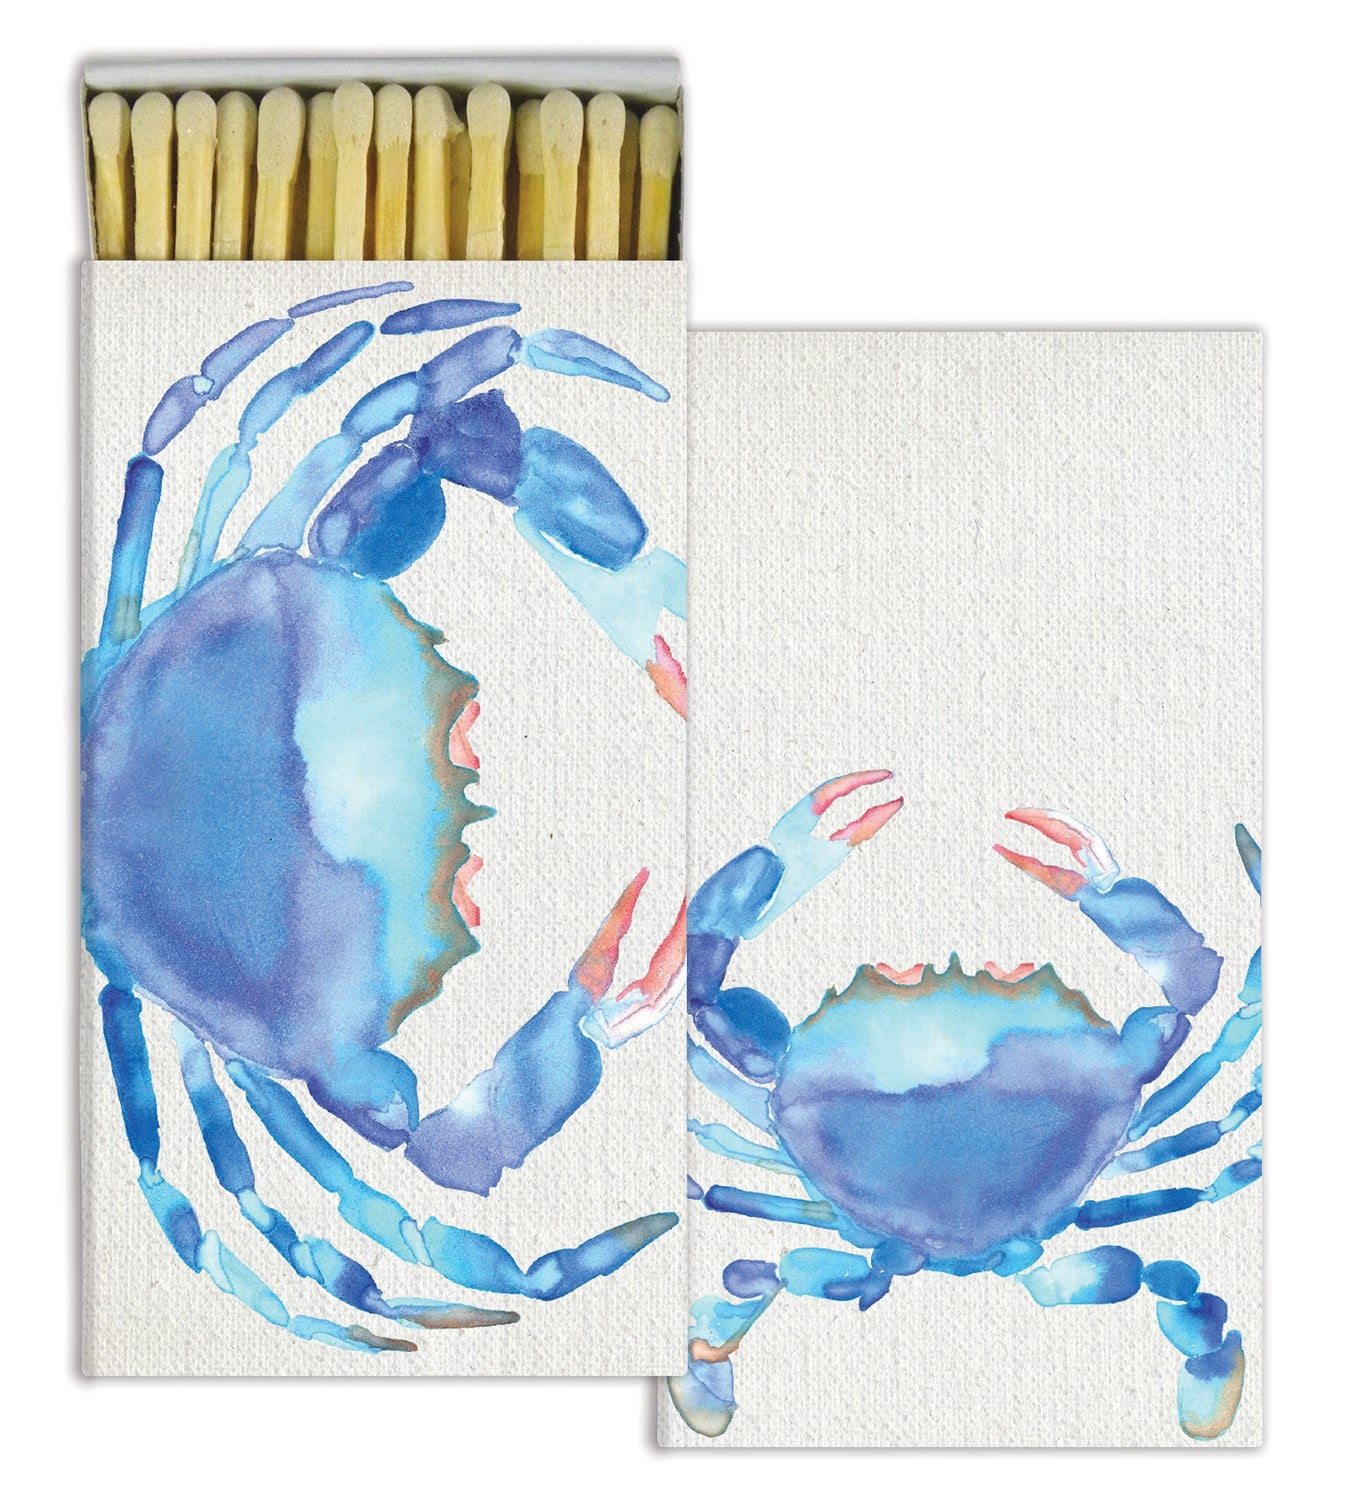 A set of eye-catching Coastal Matches in a color-coordinated box by HomArt.